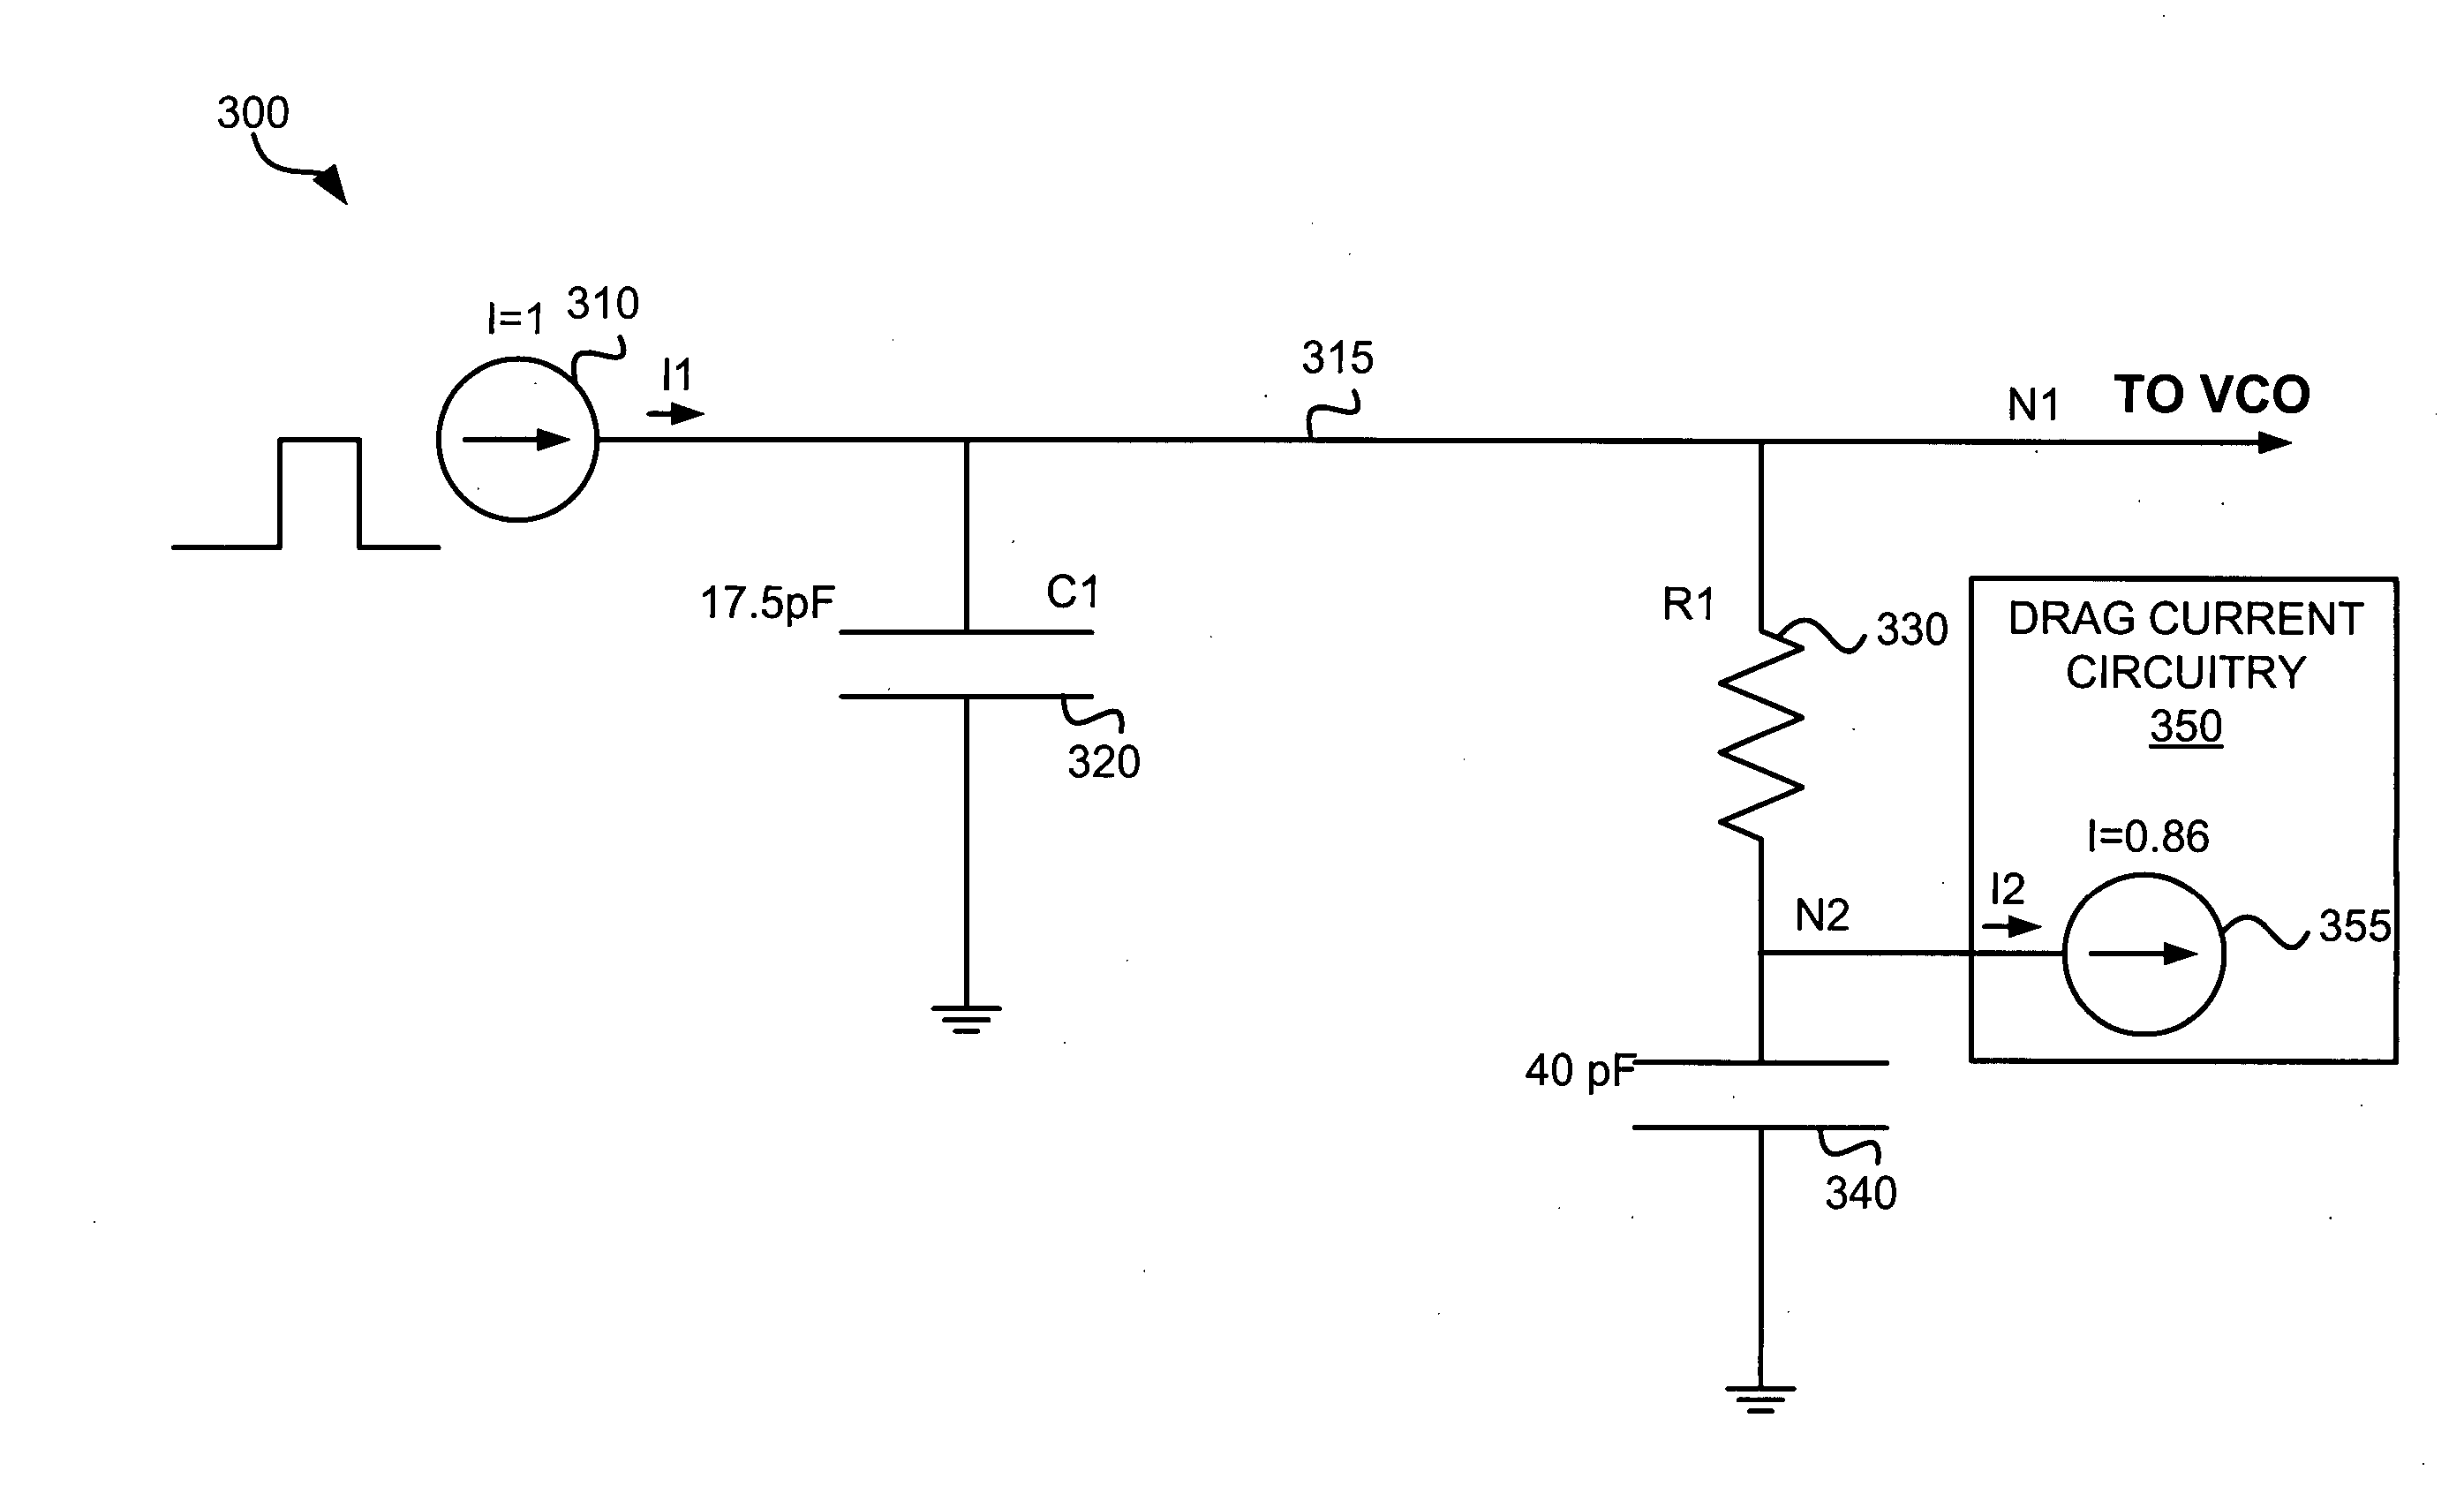 Phase-locked loop filter capacitance with a drag current